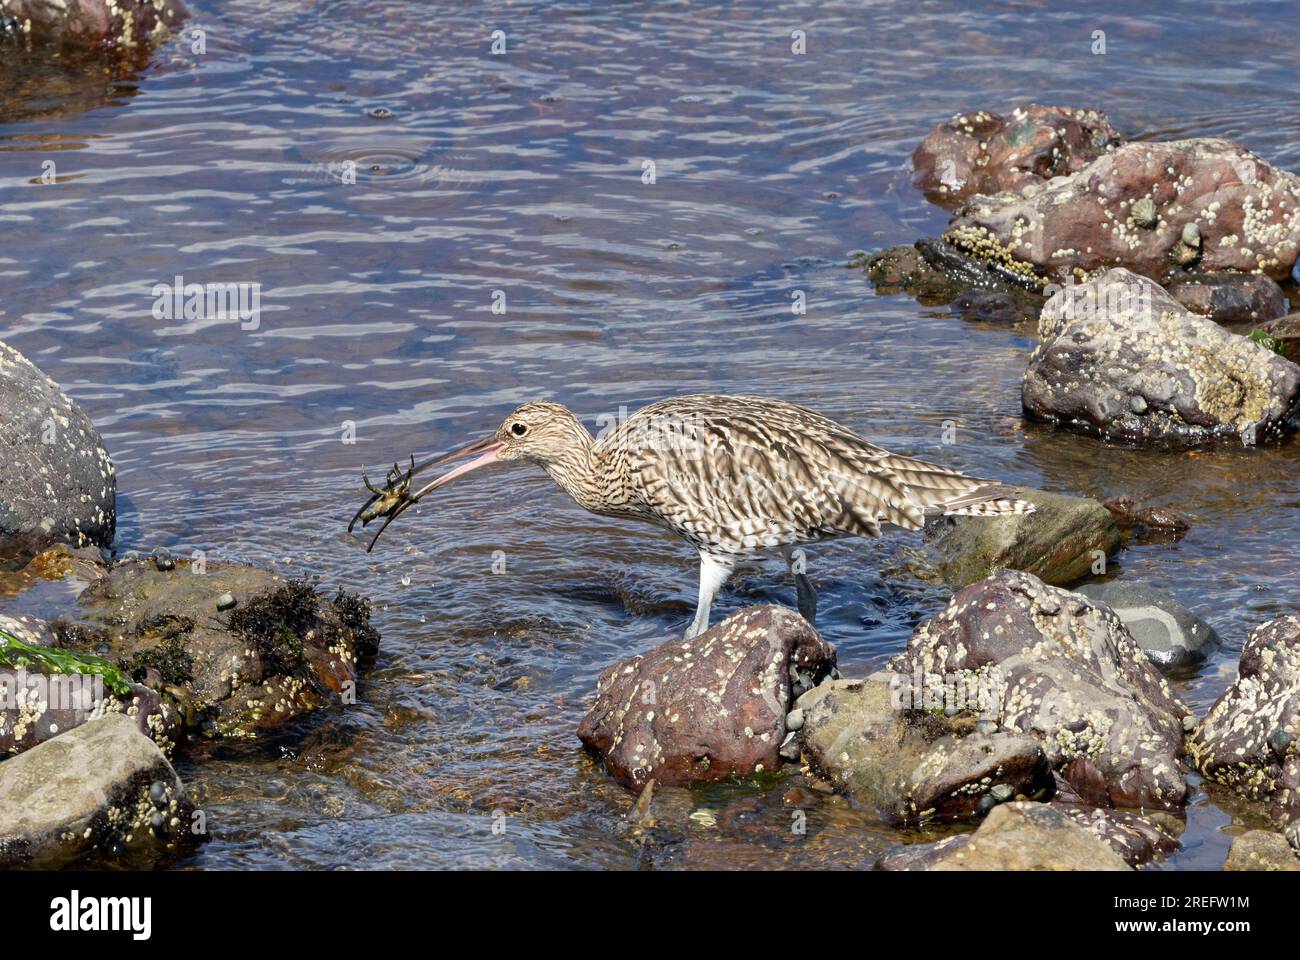 With its distinctive probing beak and cryptic plumage, the Curlew is one of the larger wading birds seen around the UK coast. Stock Photo